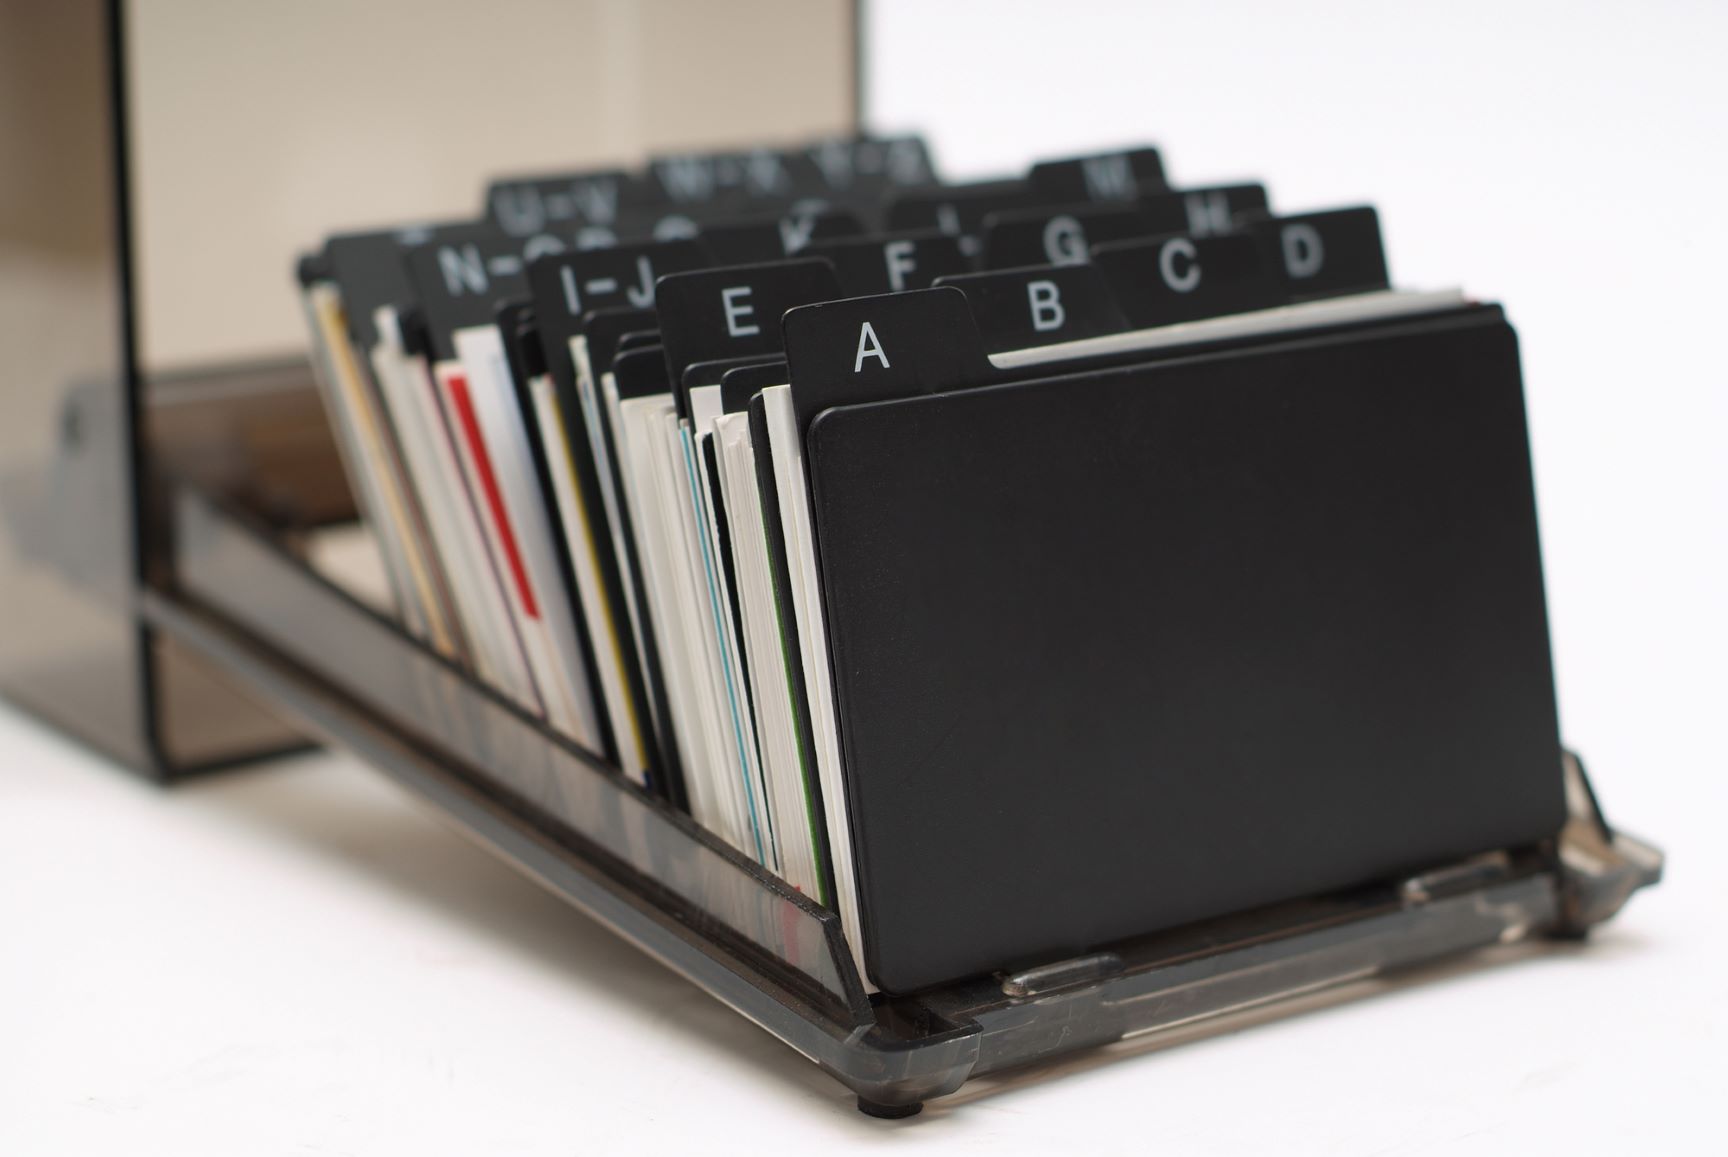 Close-up view of a Rolodex, alphabetically organizing index cards with the names and contact information of different sales leads.